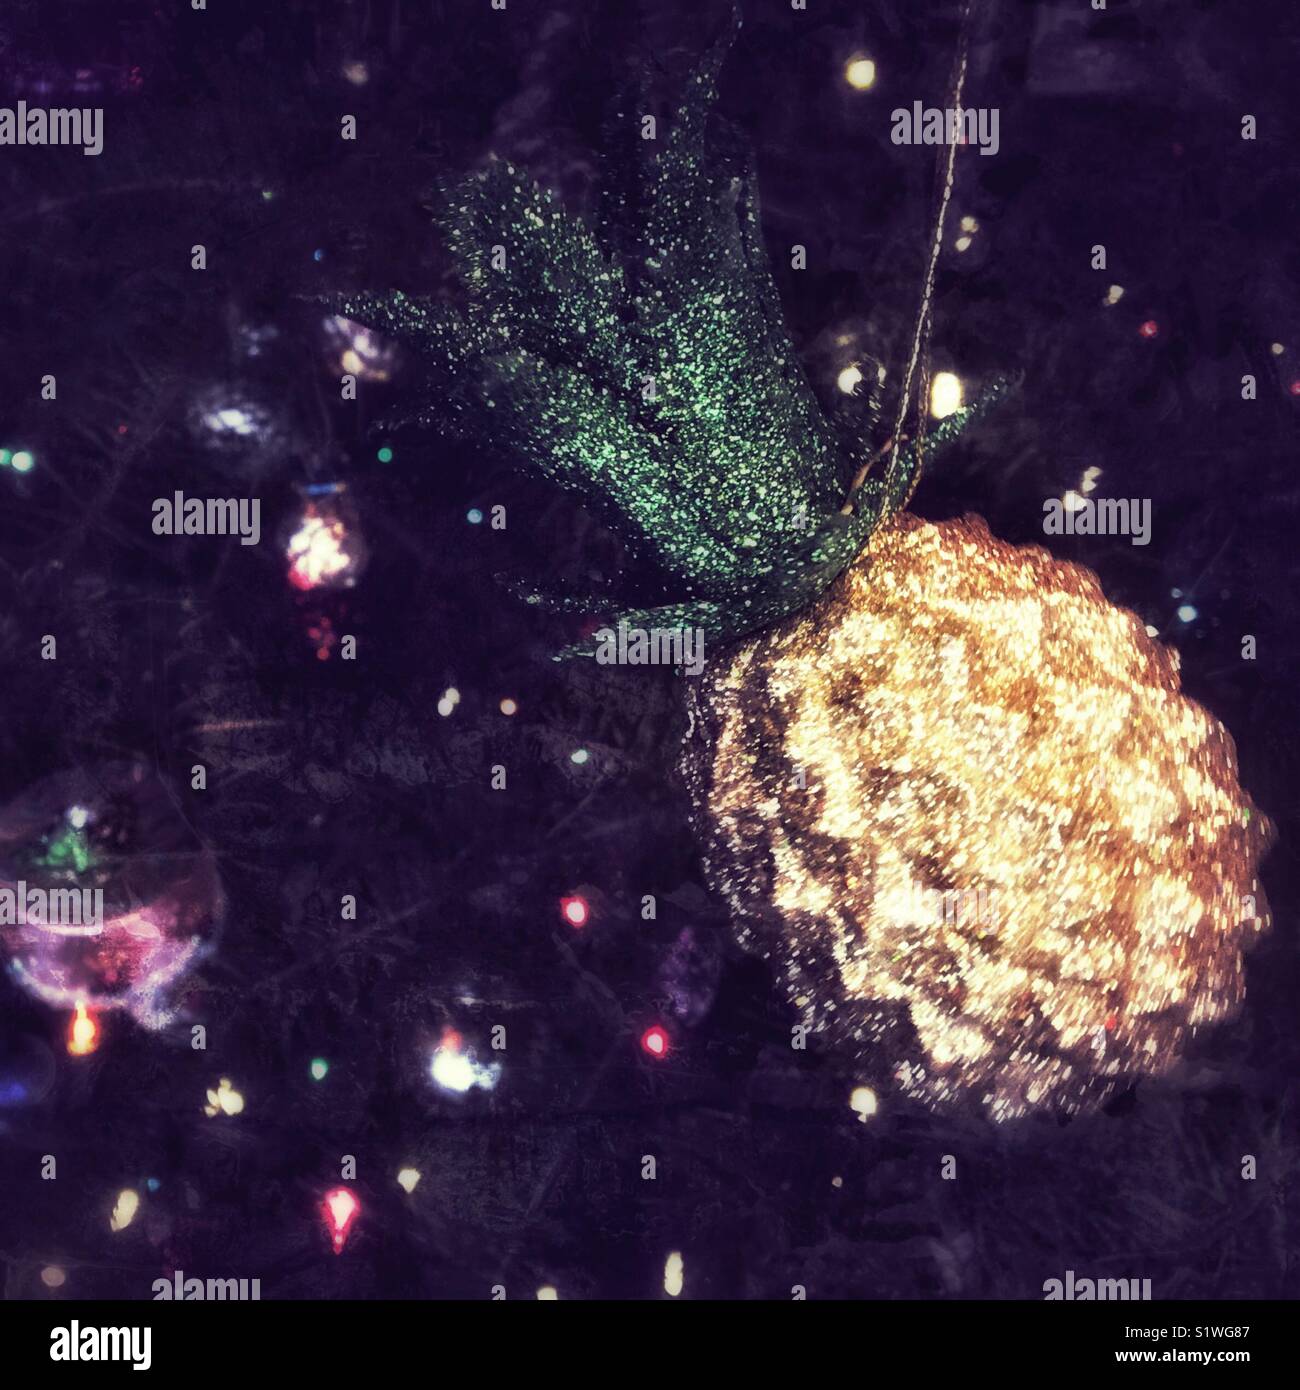 Sparkling pineapple ornament hanging on a Christmas tree. Dark edit. Square crop. Stock Photo